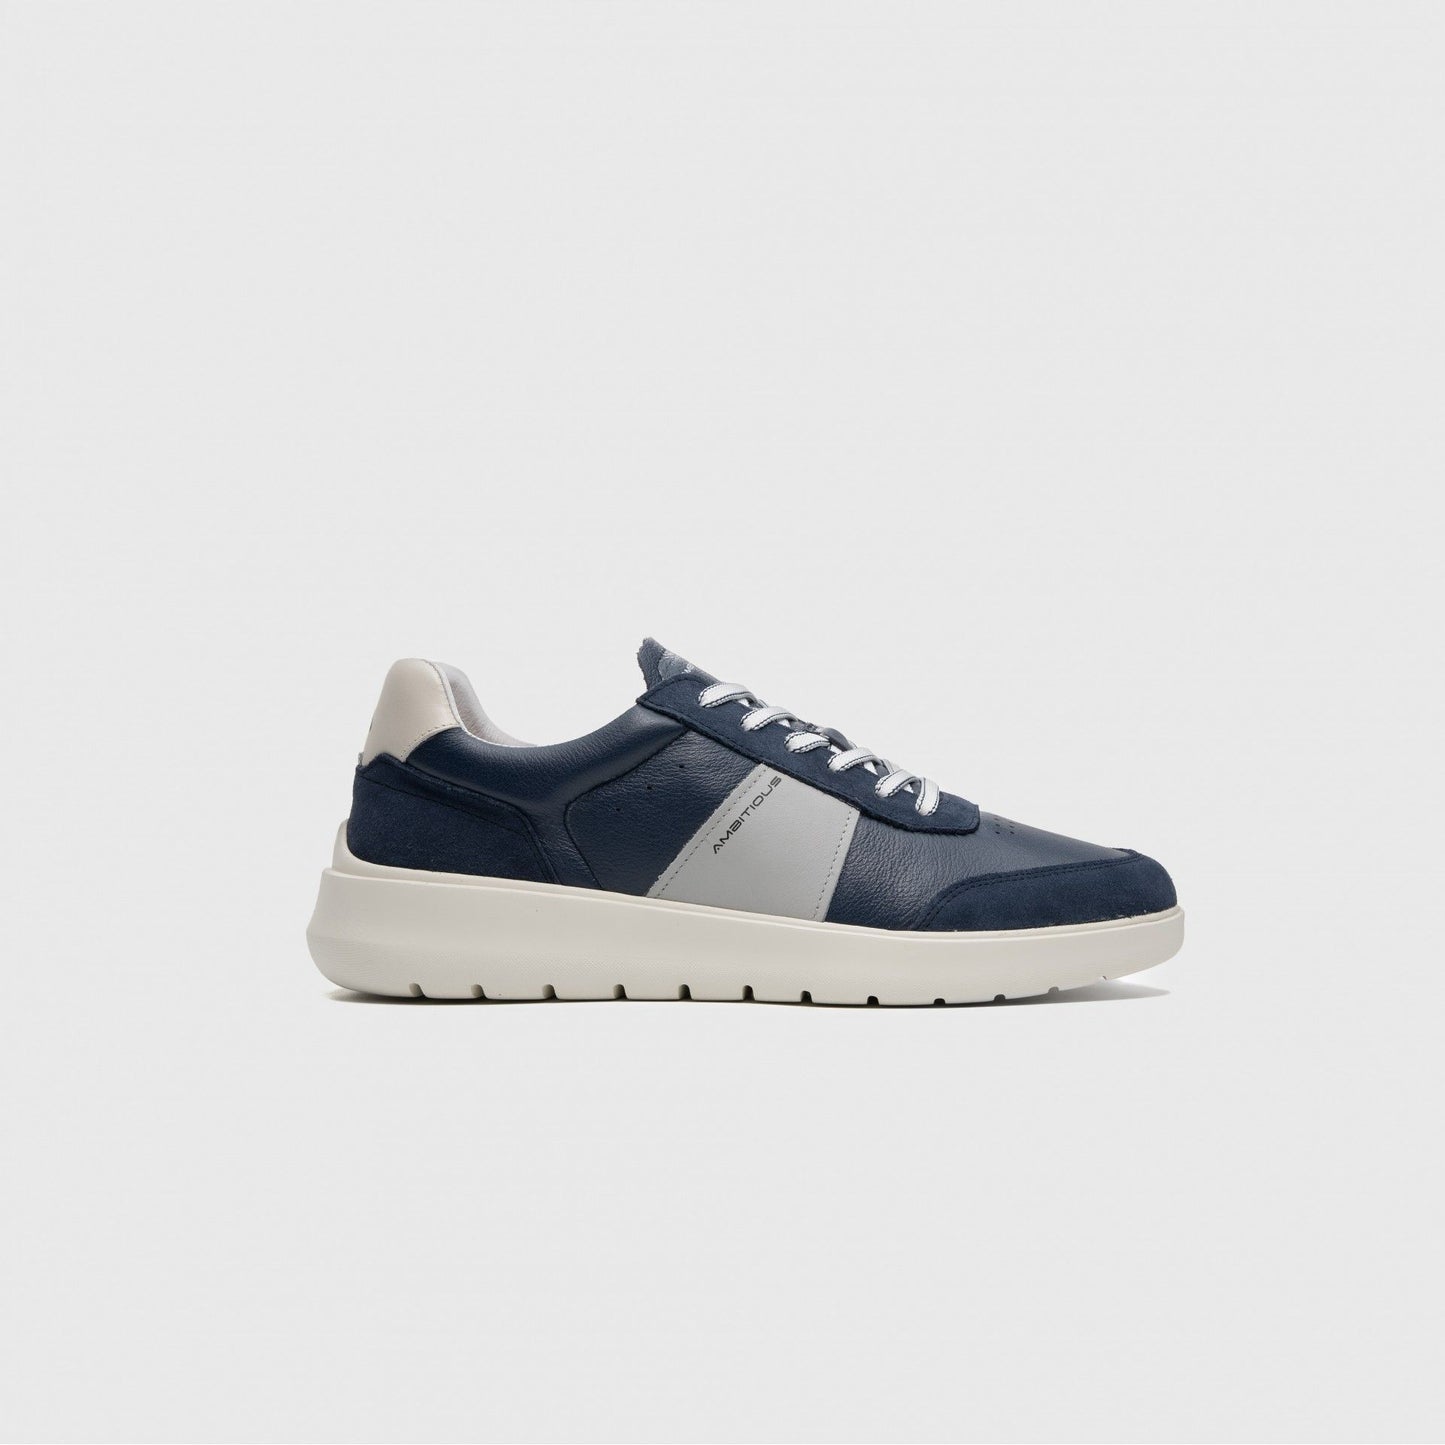 Ambitious 12863 1785 Grey / Navy Trainers